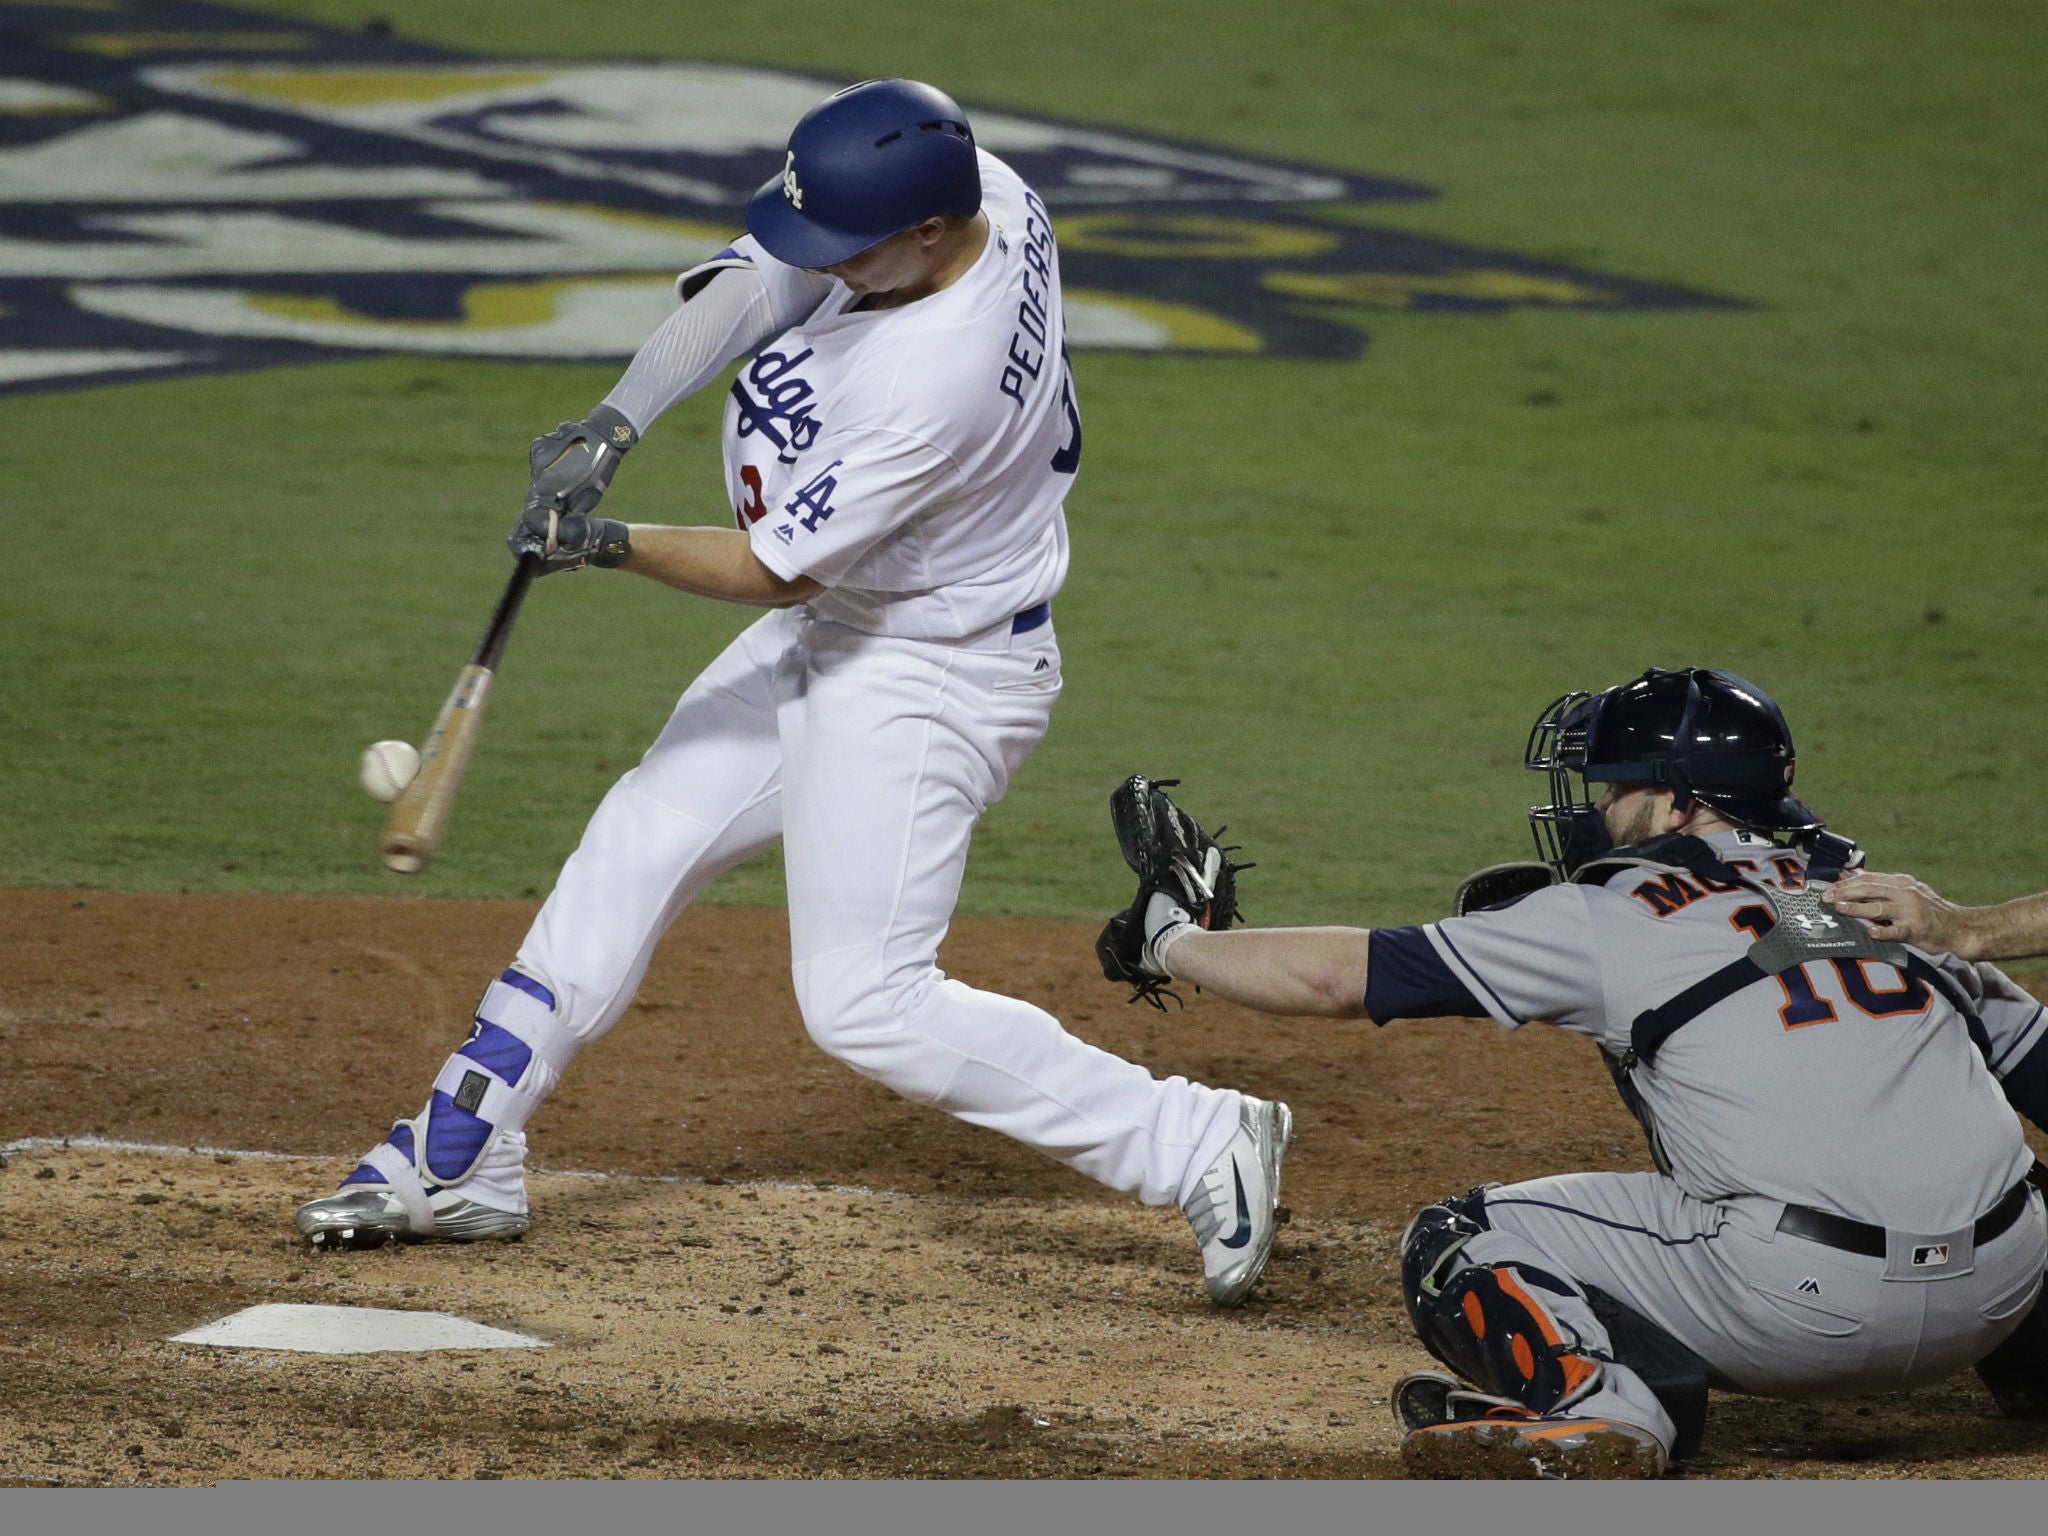 Dodgers' Joc Pederson driven by brother Champ